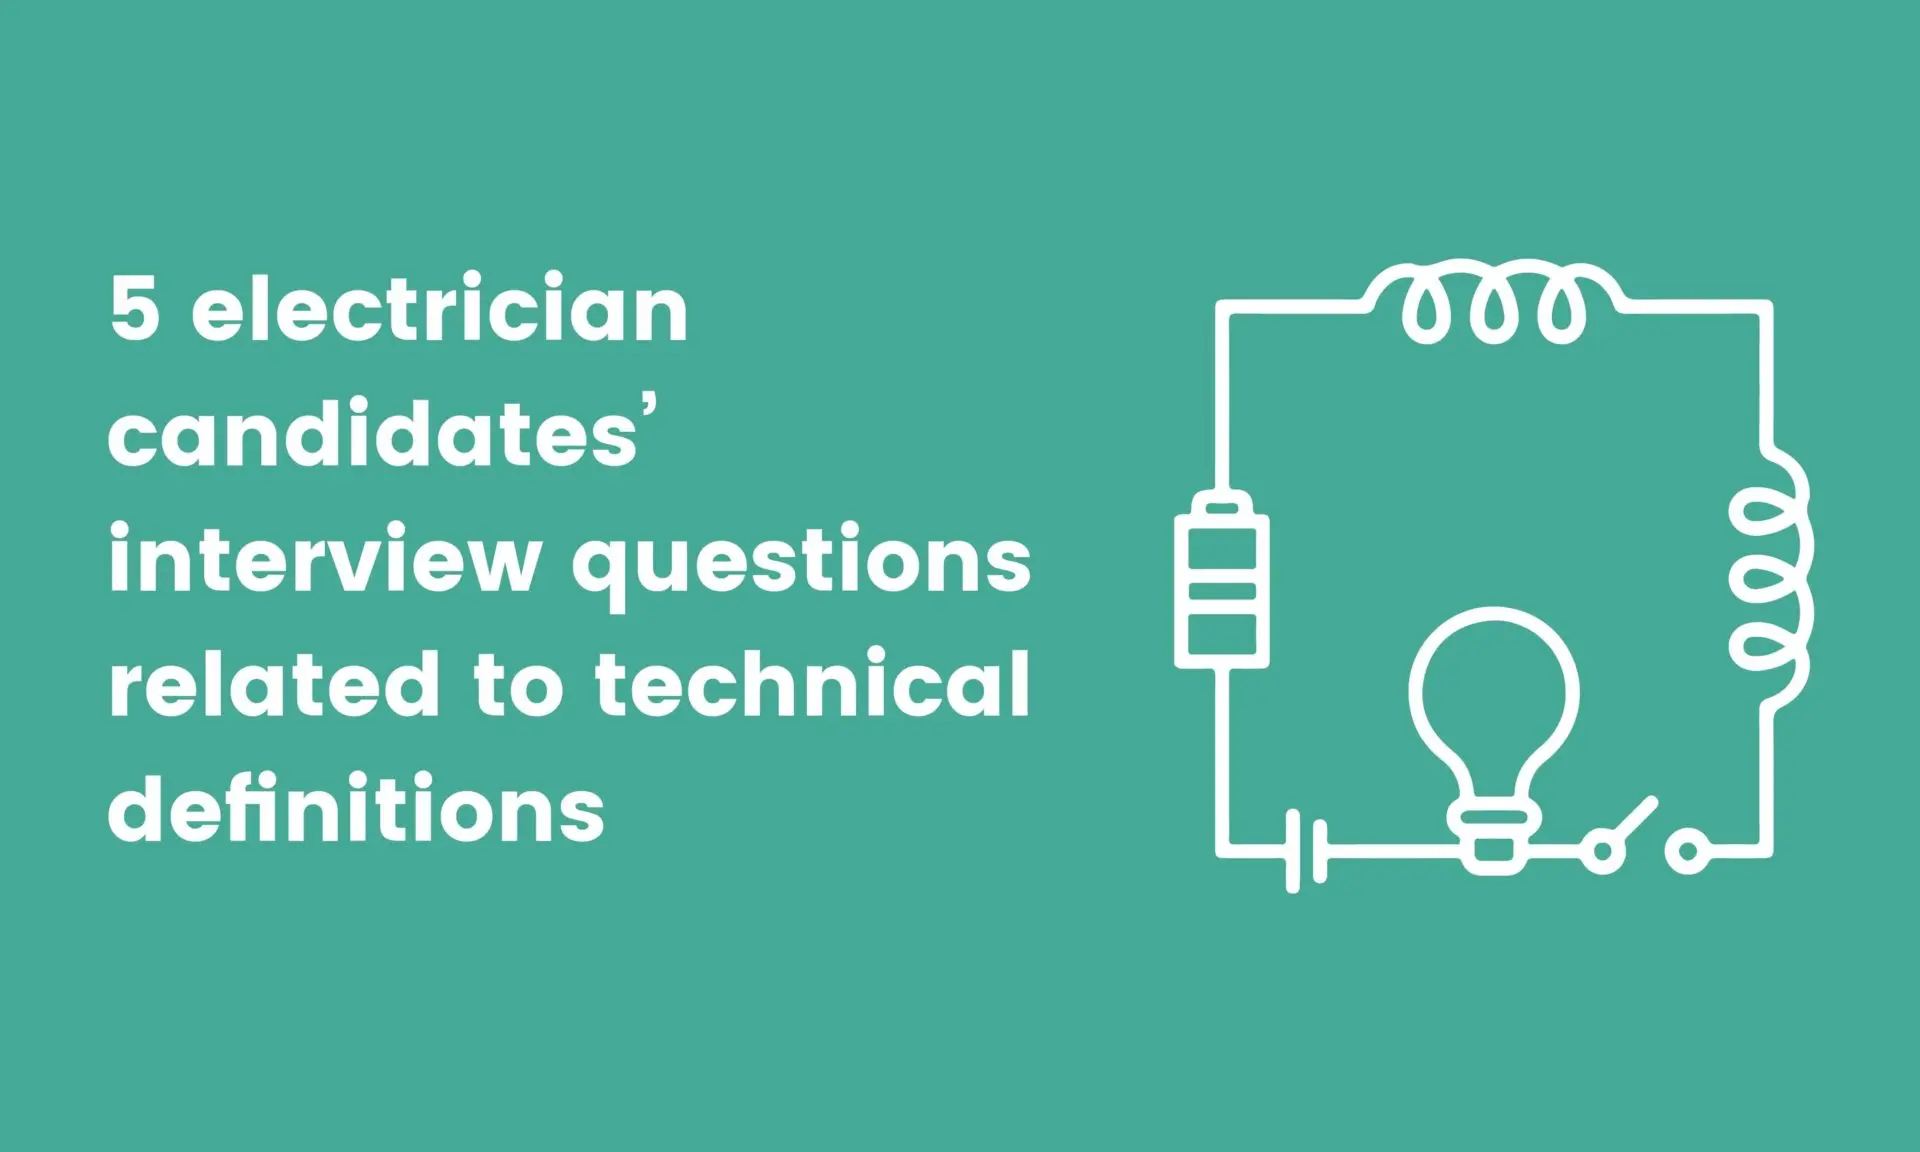 banner image for 5 electrician candidates’ interview questions related to technical definitions